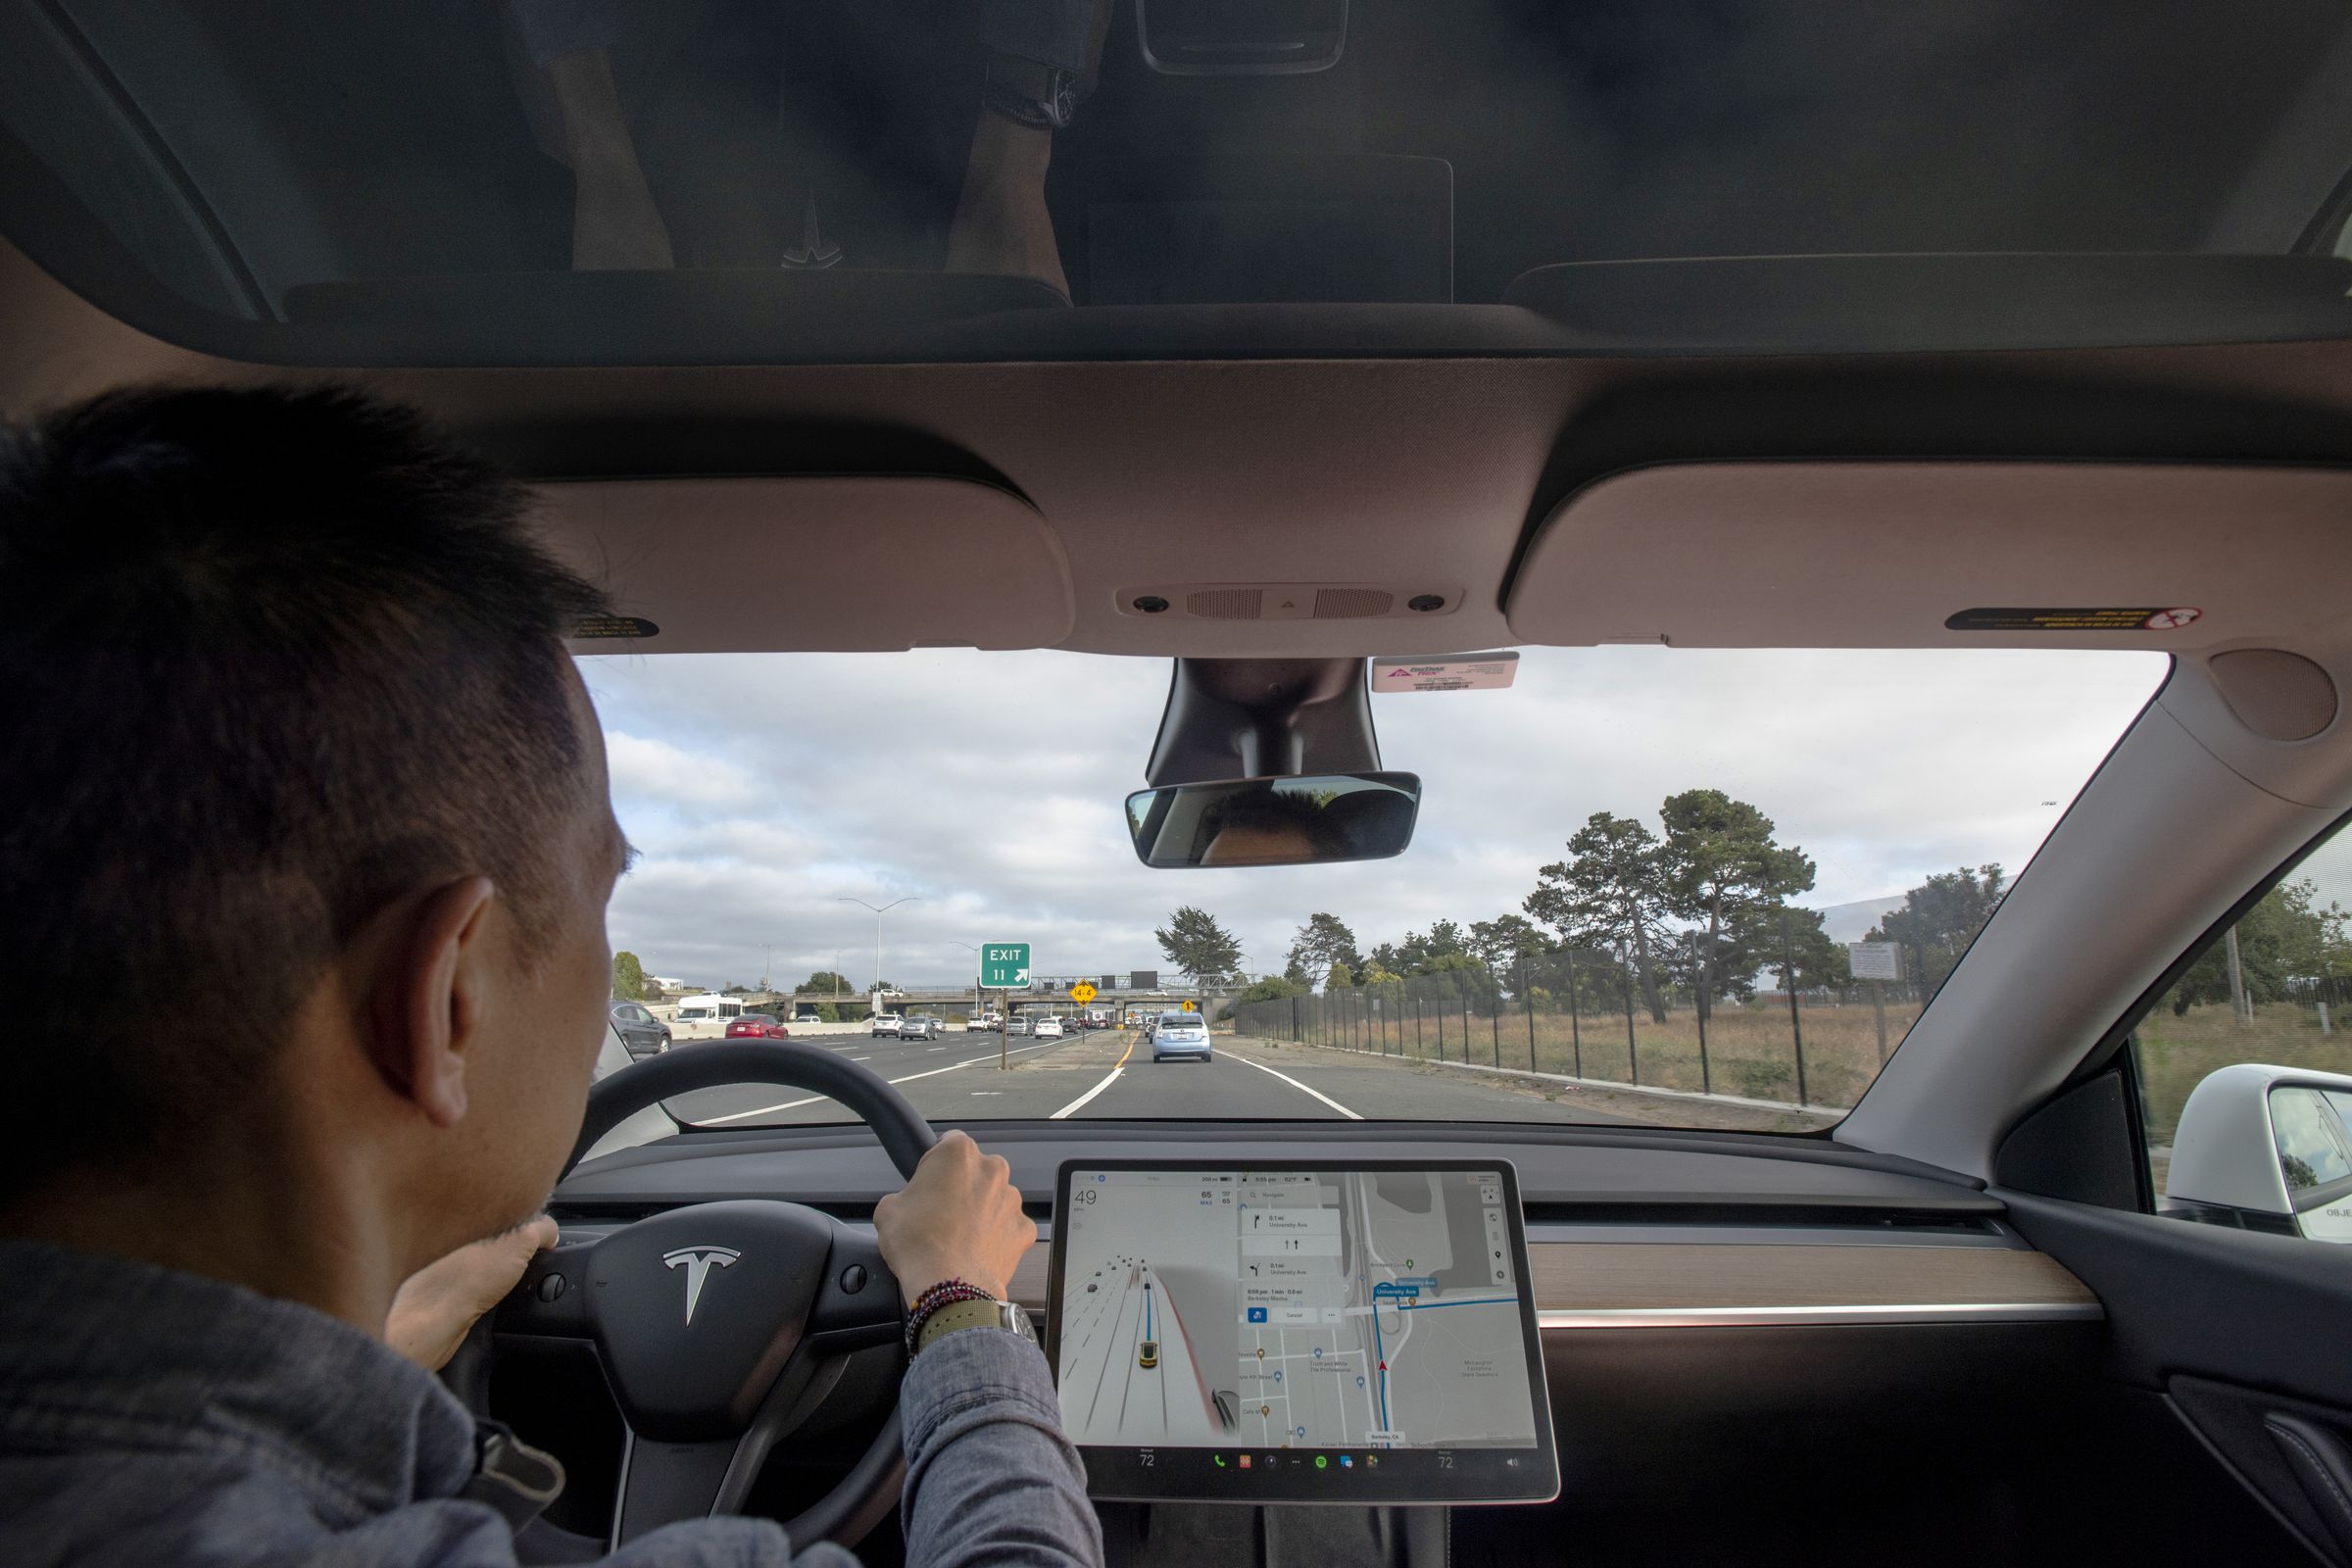 View of FSD system in action with Tesla dashboard display